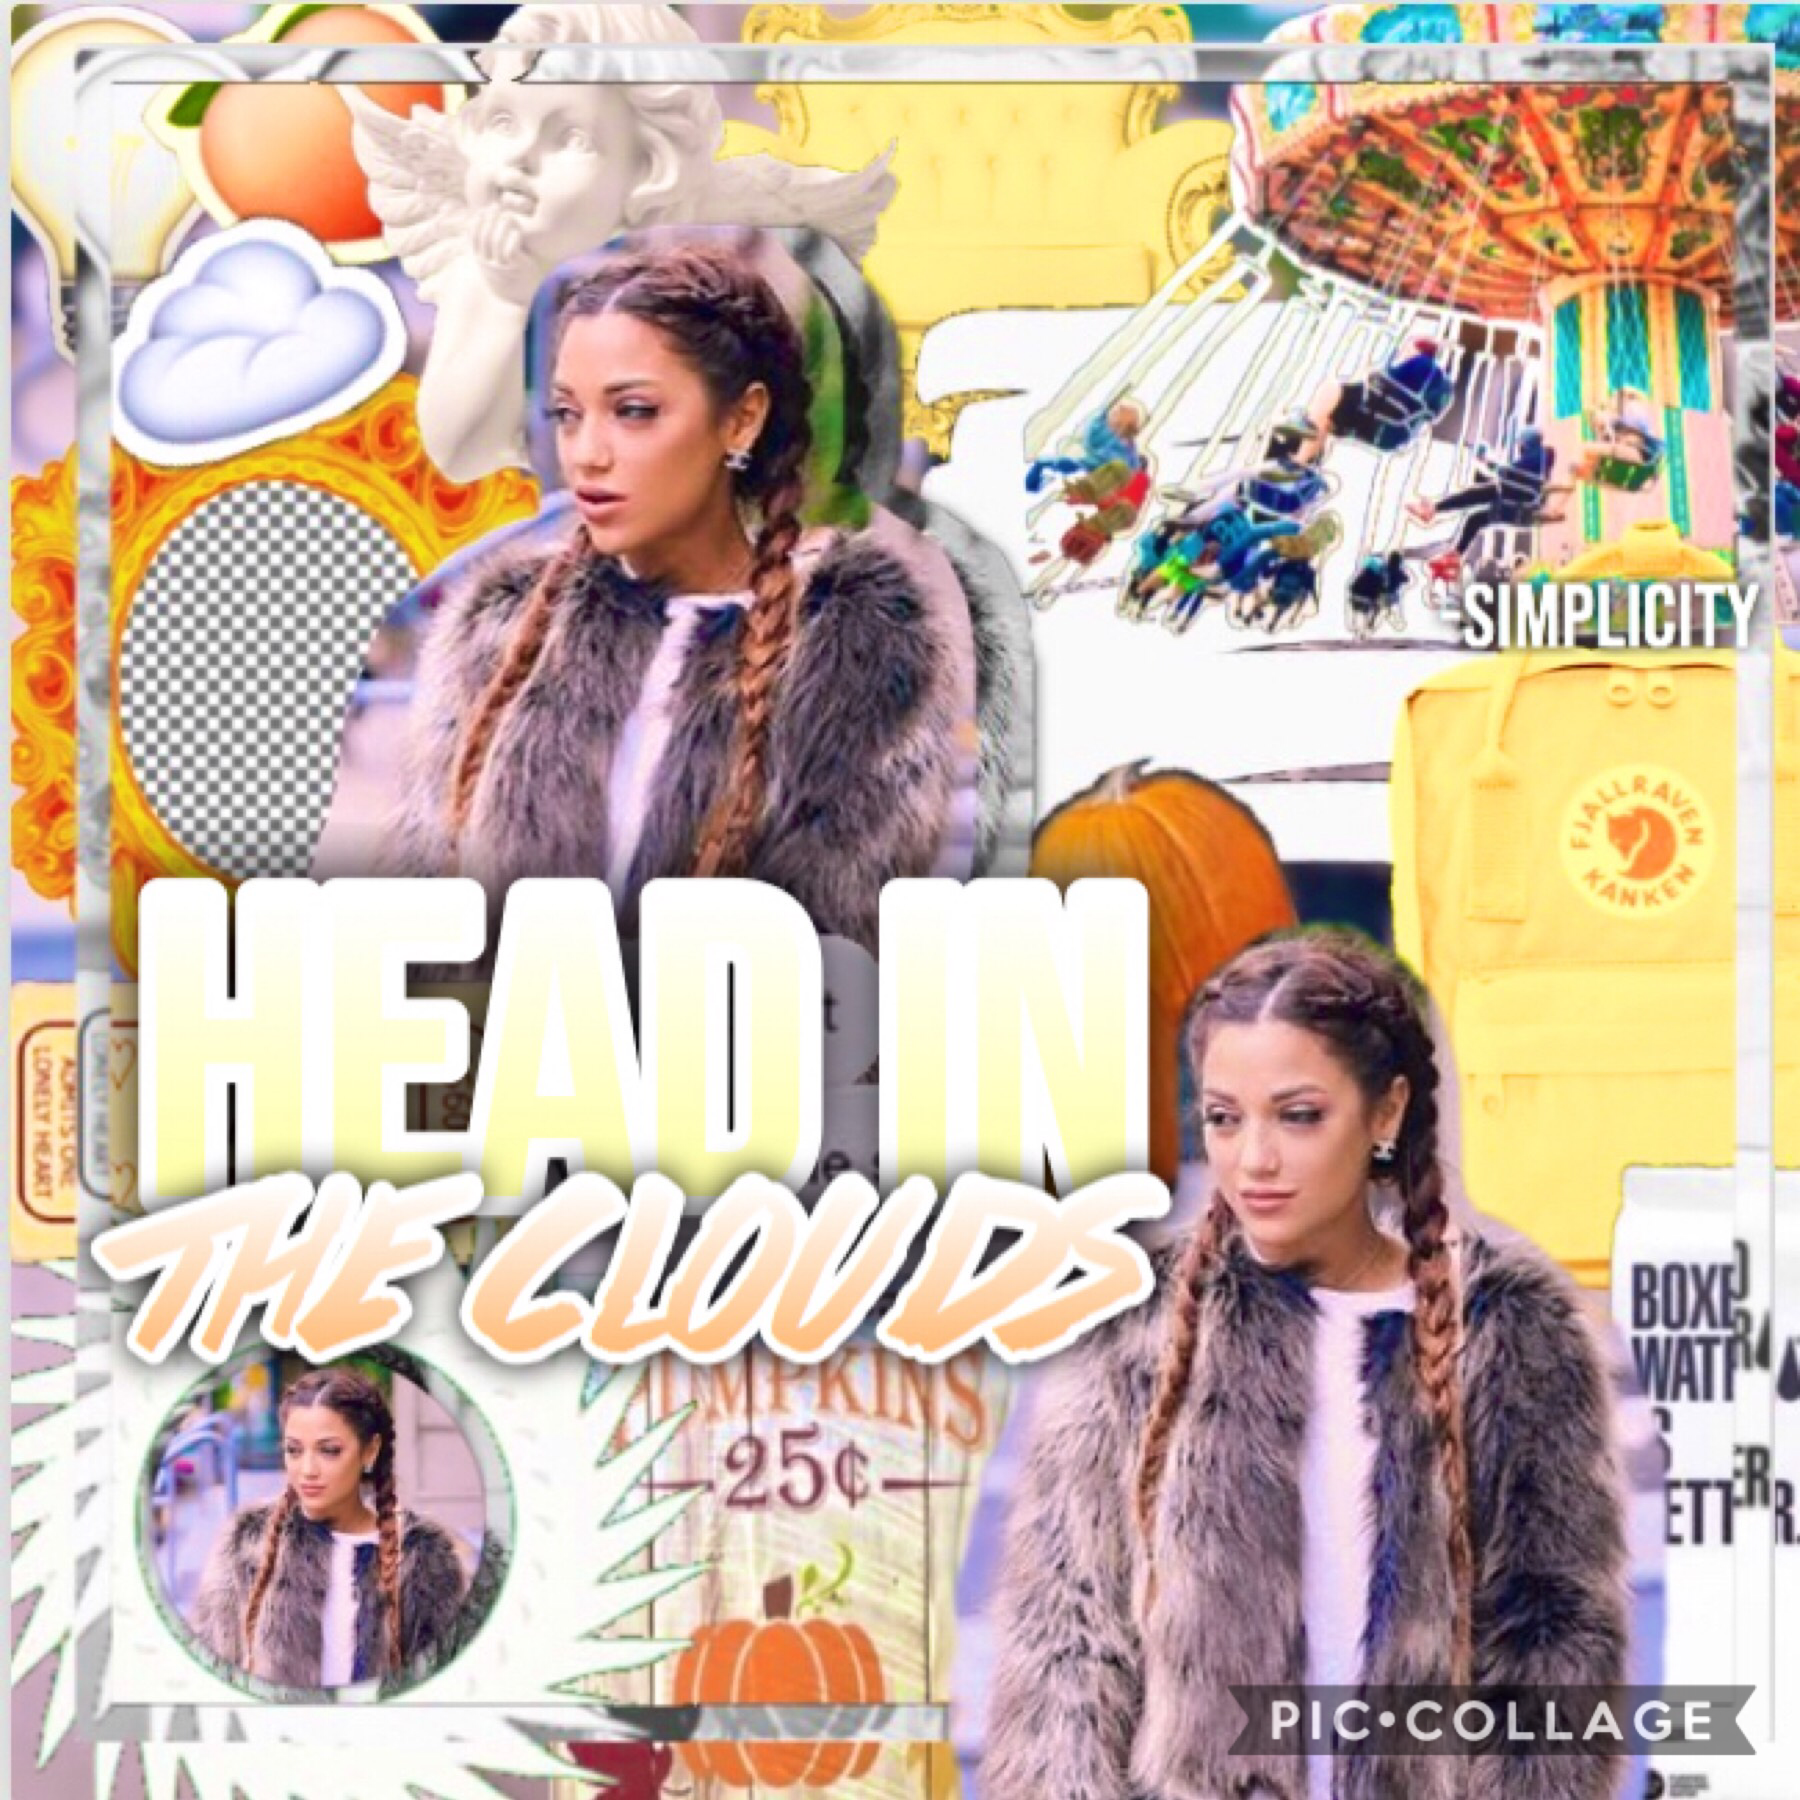 TAP
I found these Gabi pics off pinterest🤣 fall themed edit in the spring🤦🏻‍♀️ Hope you guys enjoy it!
QOTD: first five emojis that pop up
AOTD: ❤️💕🙌🏻🐣🤩